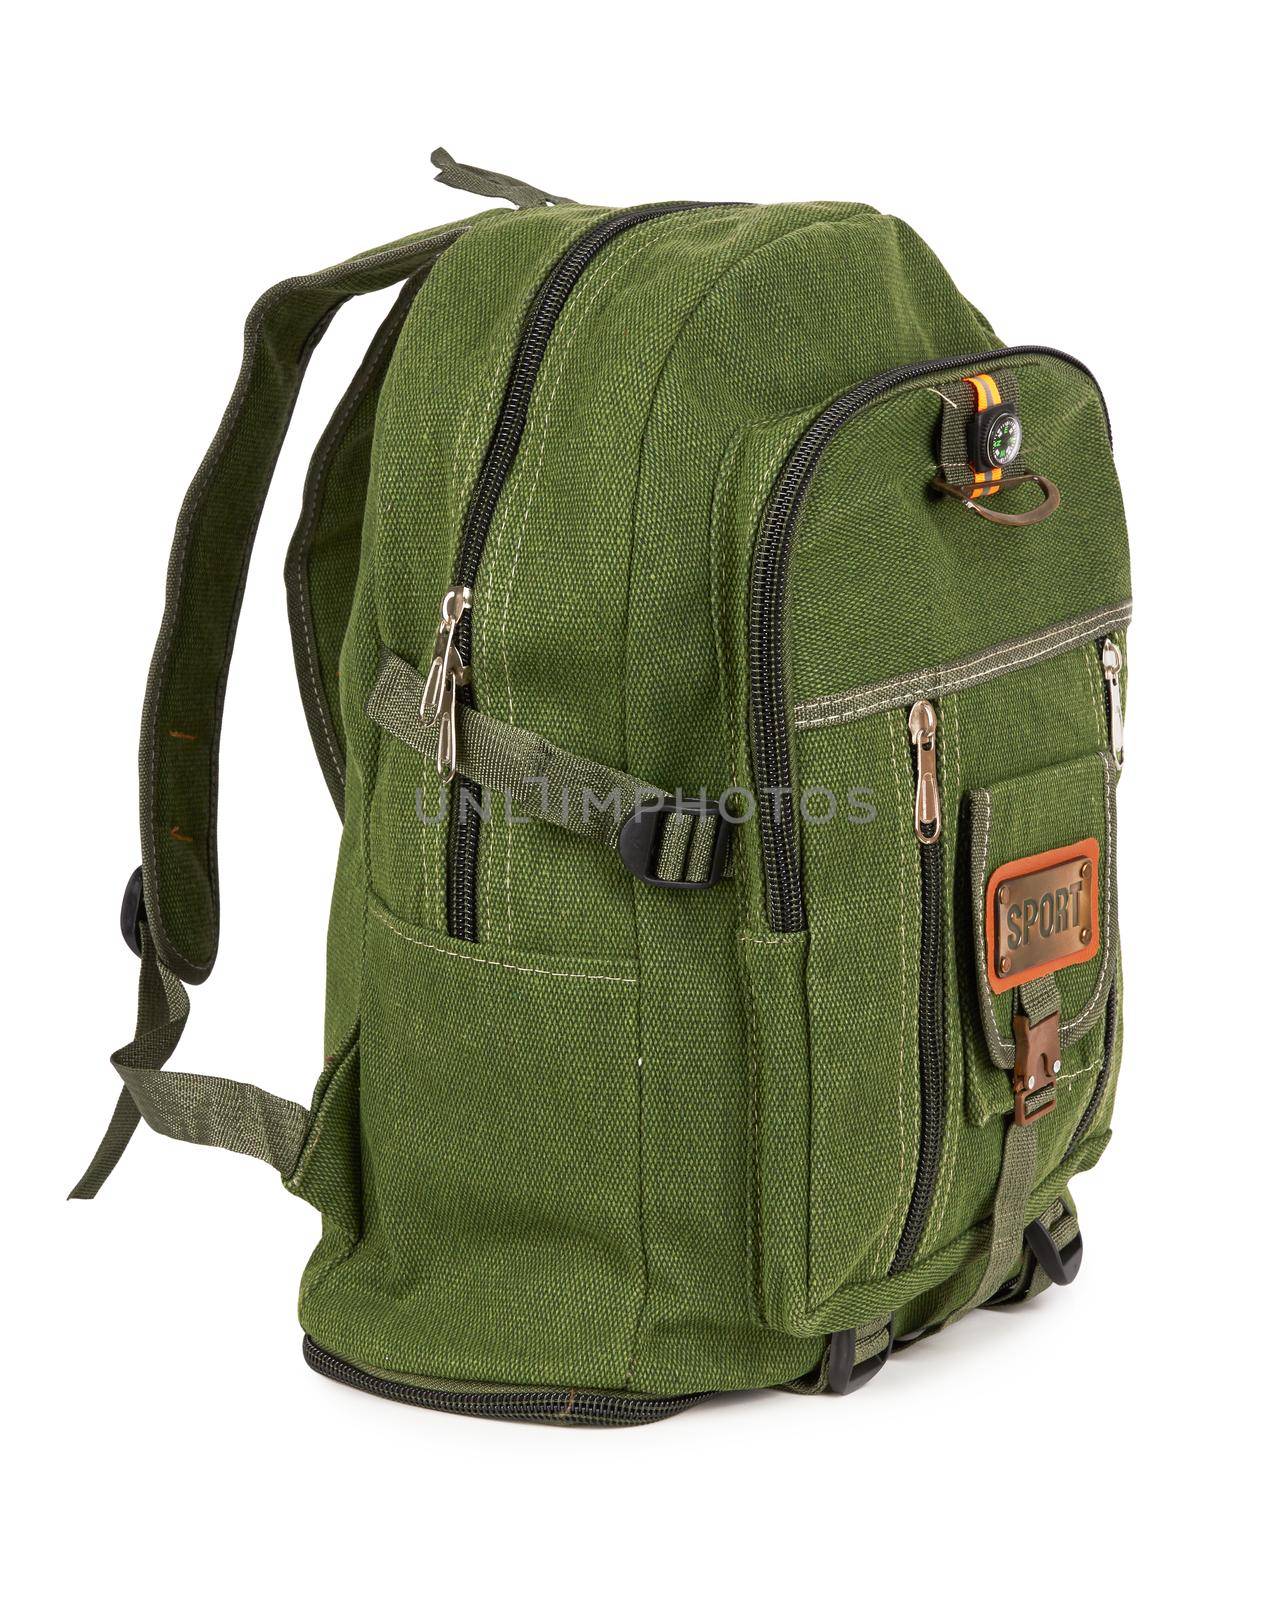 Big backpack for travel by pioneer111